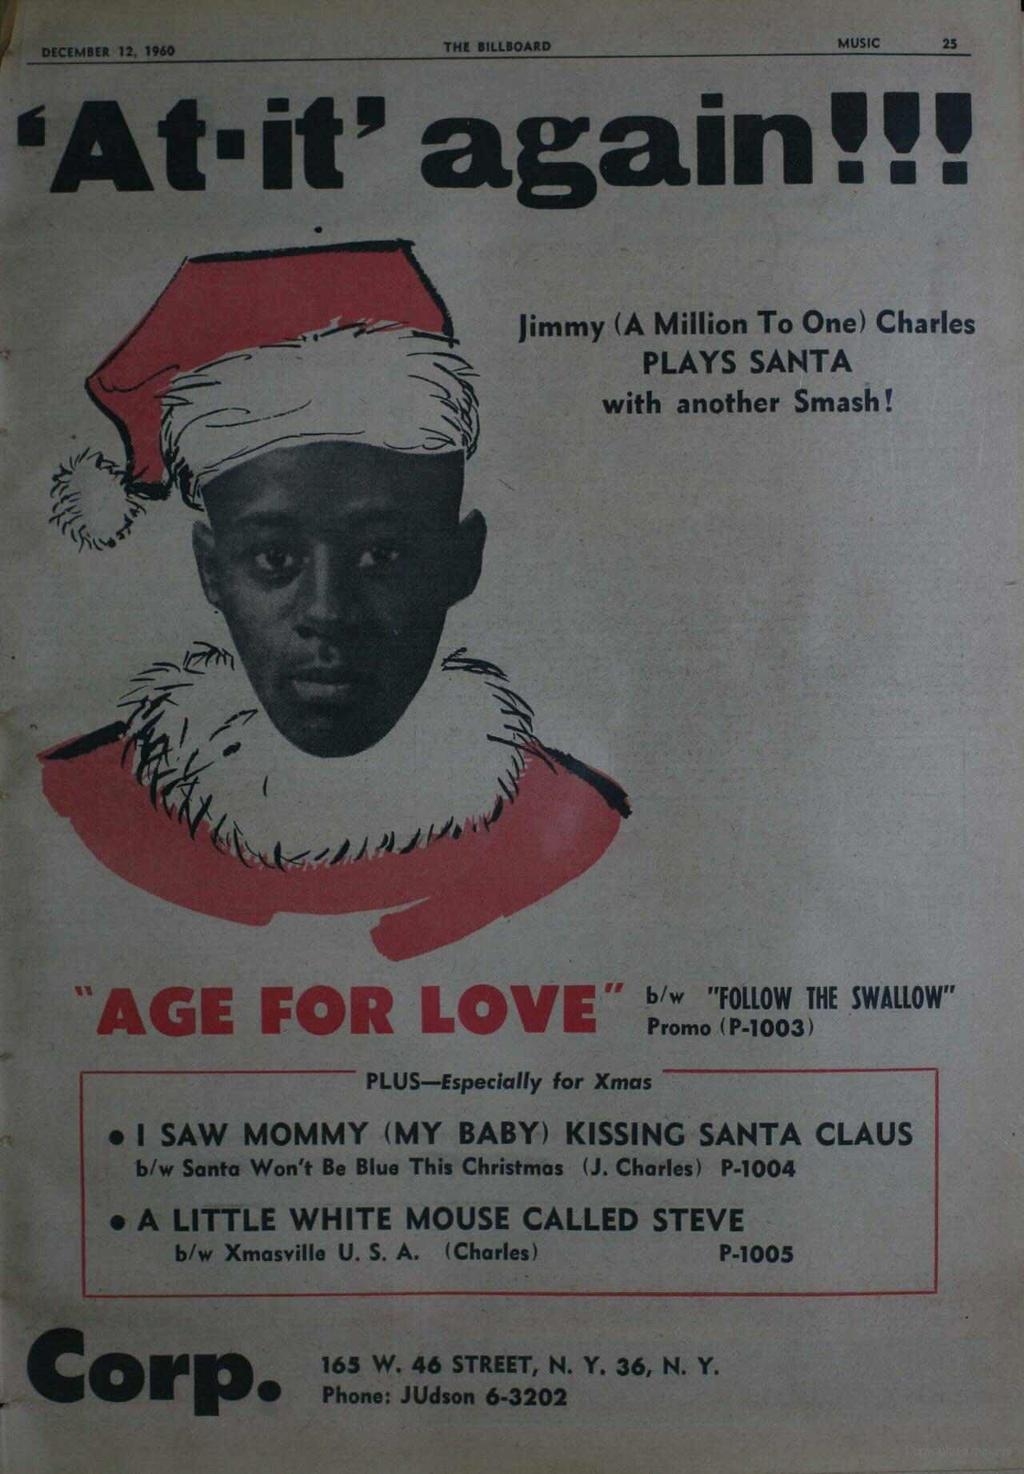 DECEMBER 12, 1960 THE BILLBOARD MUSIC 25 Atit' again'" Jimmy (A Million To One) Charles PLAYS SANTA with another Smash!